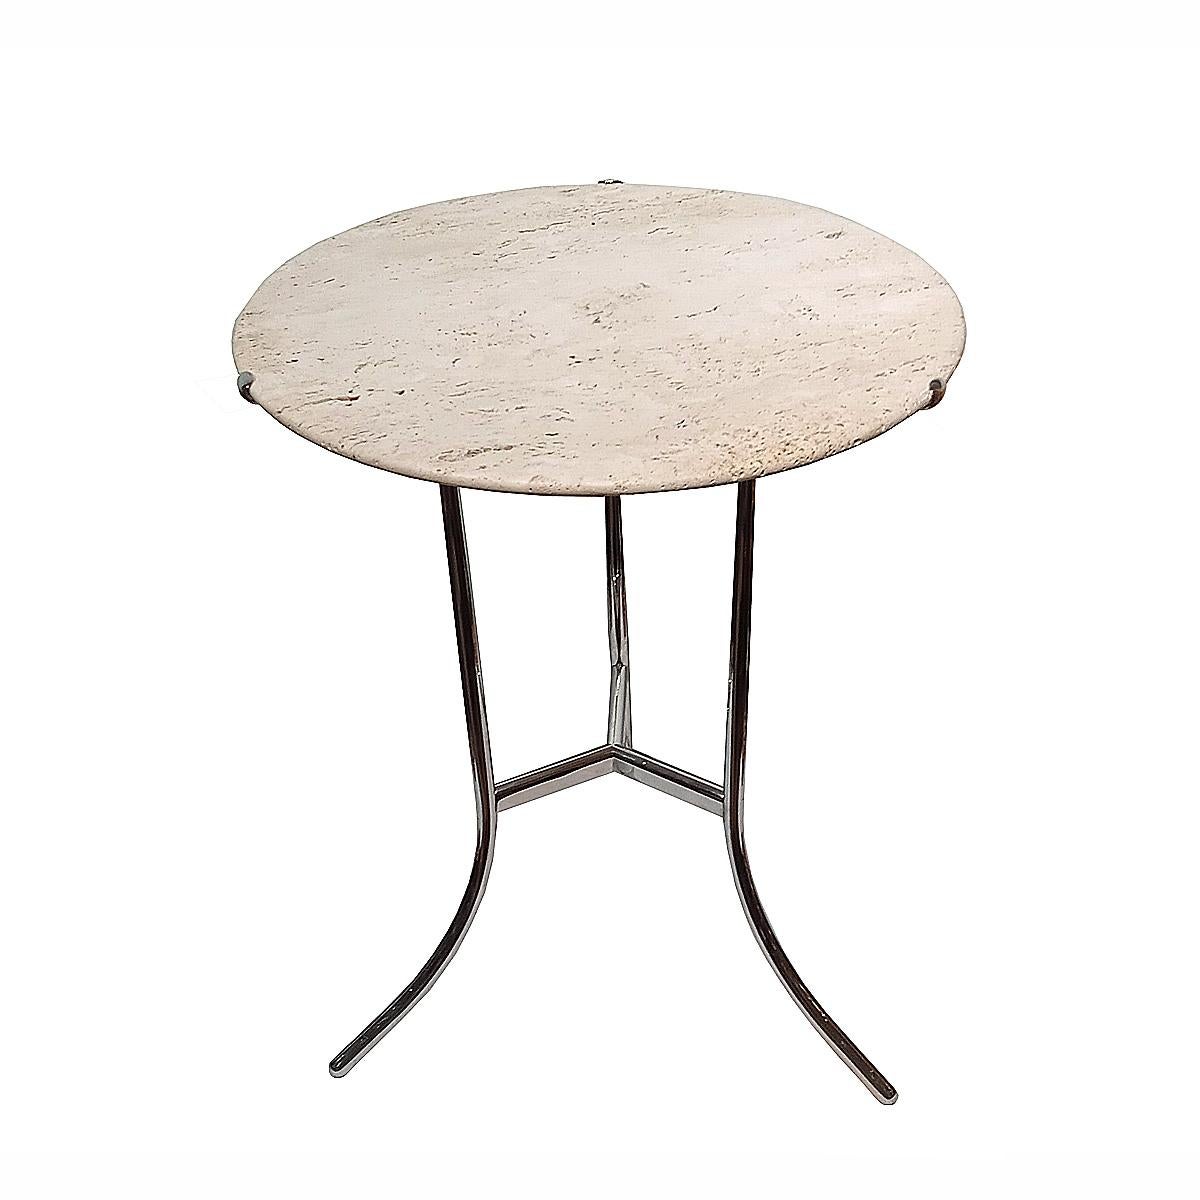 Hand-Crafted Side Table by Cedric Hartman, in Travertine Marble and Nickel-Plated Brass